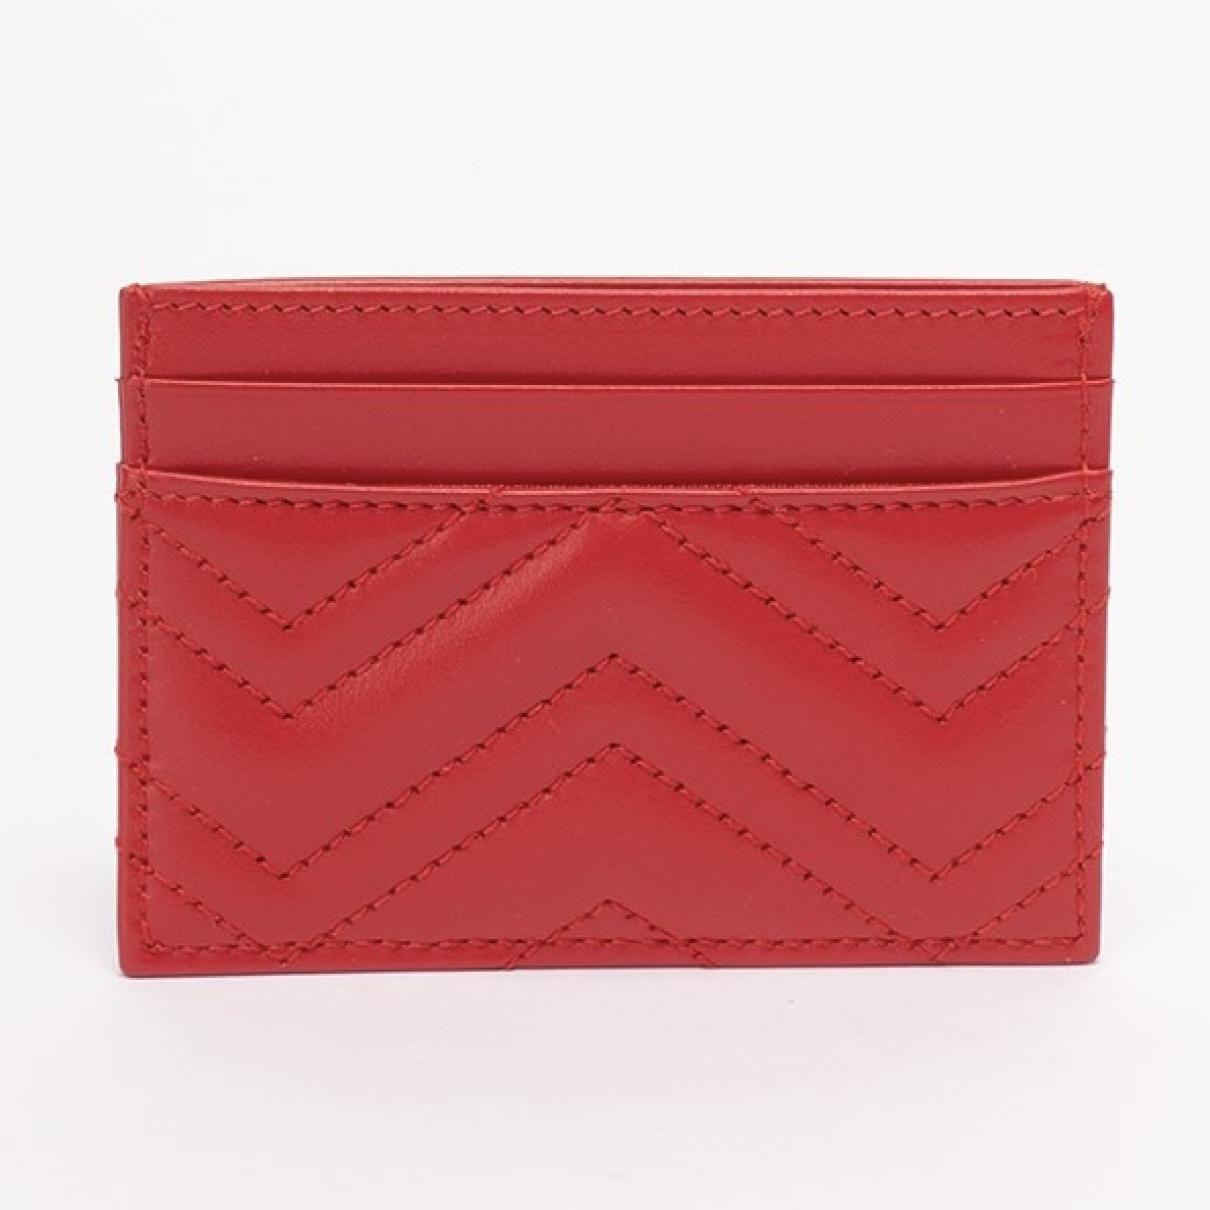 Marmont leather card wallet - 2